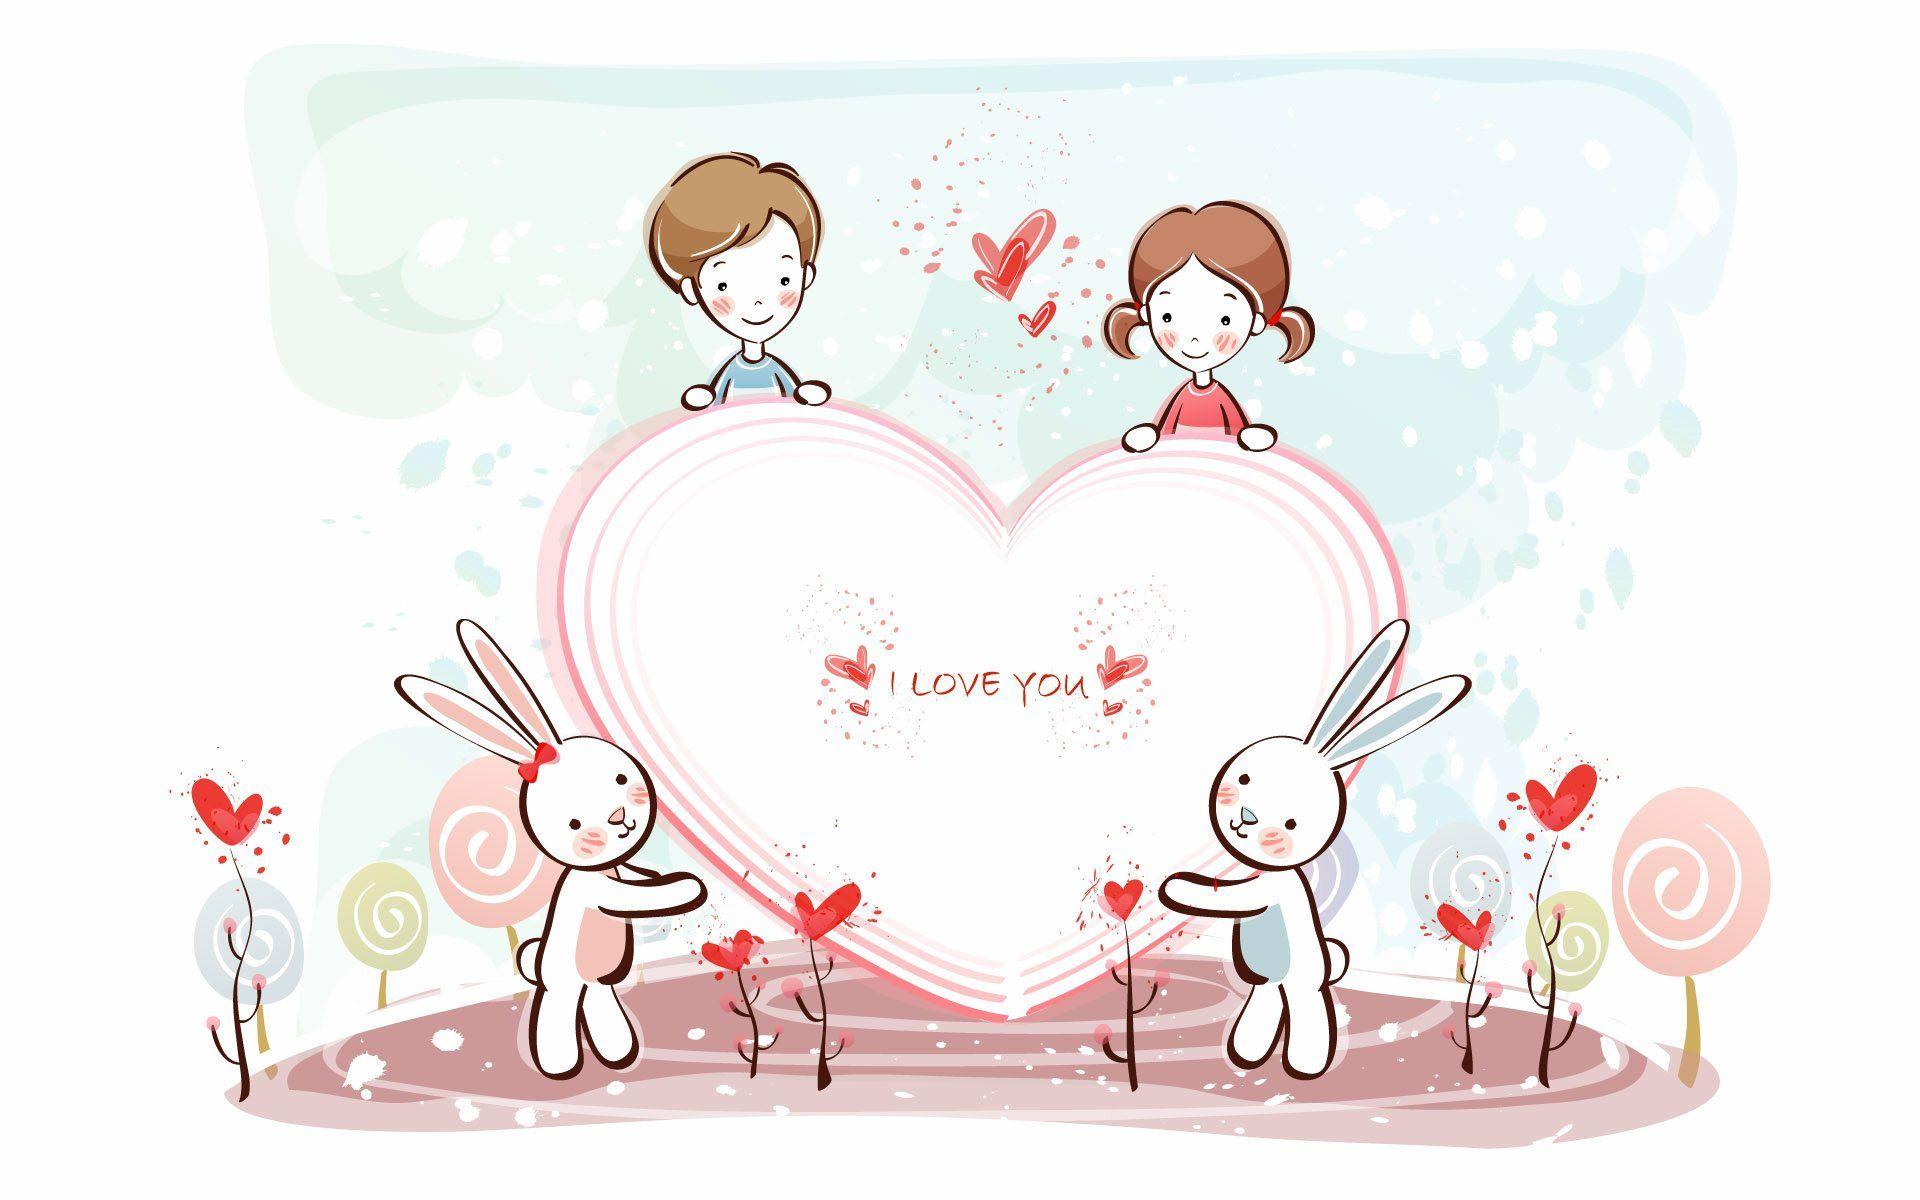 Cute I Love You Moving Picture Wallpaper. LoveWallpaperHD